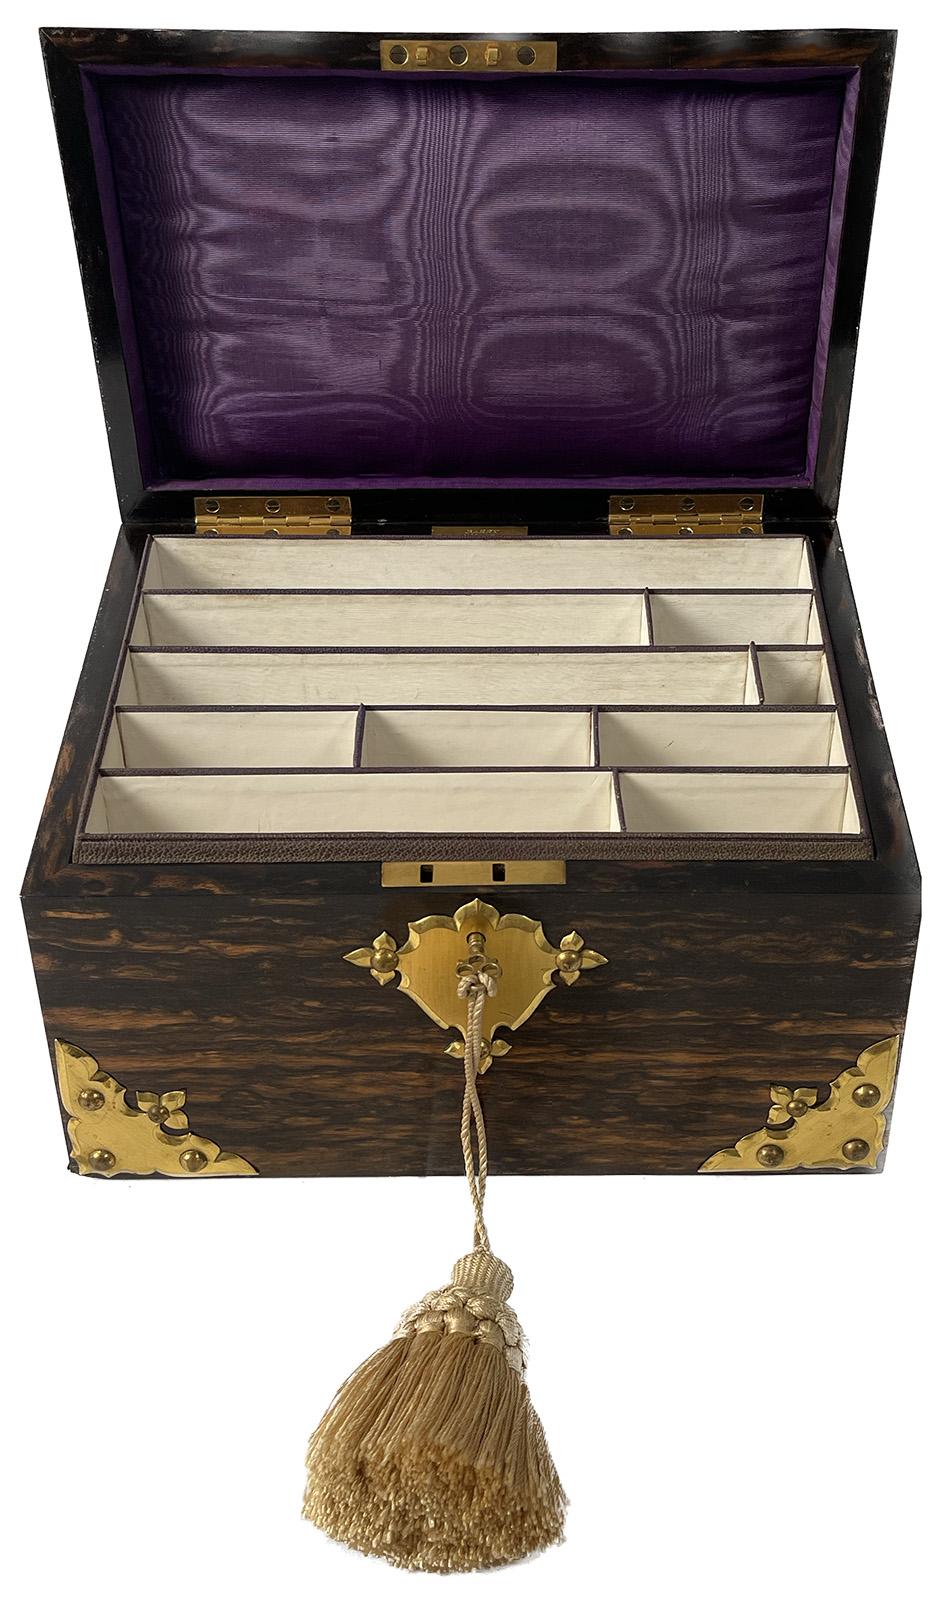 An English filing box made from calamander wood with brass and malachite fittings, circa 1870. Inside is lined with fabric and bottom of box is padded with velvet.

Dimensions: 5.75